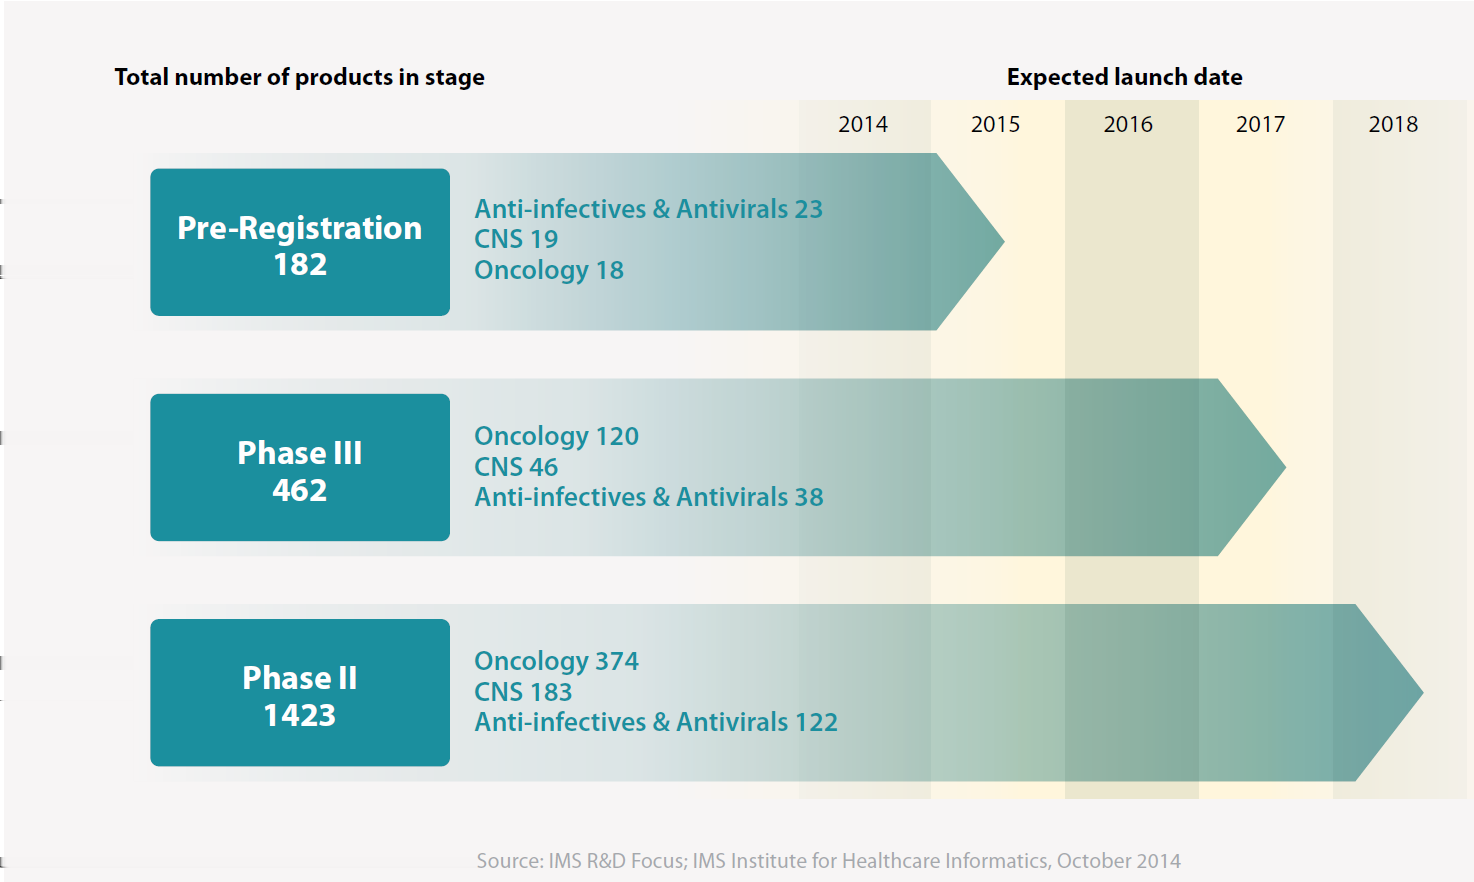 Oncology products continue to drive the pipeline: approx.